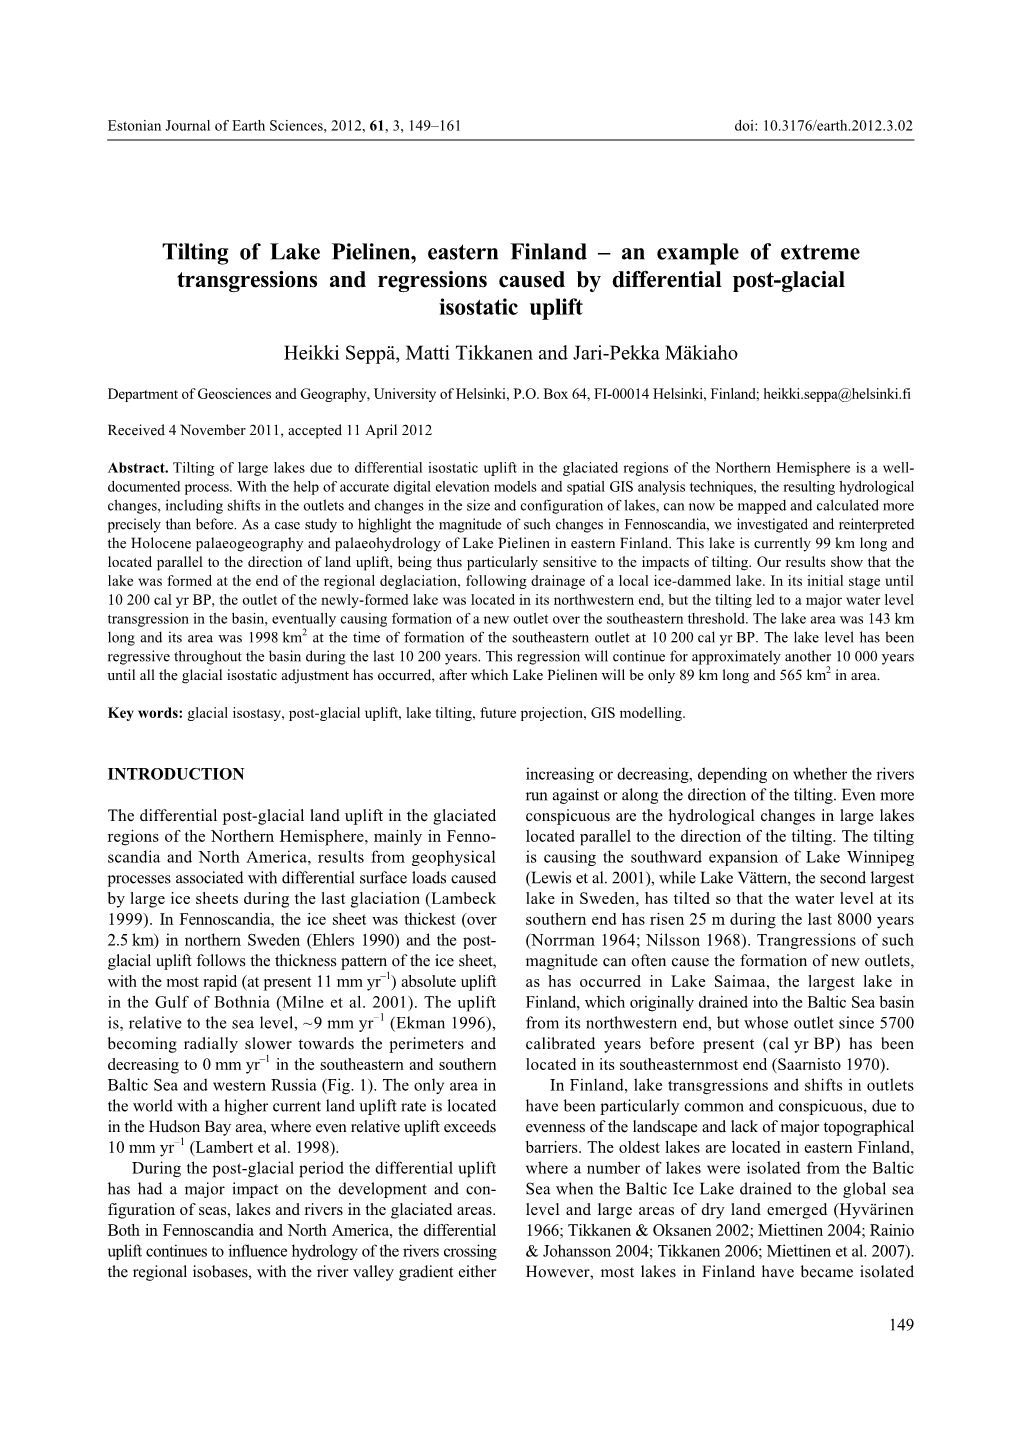 Tilting of Lake Pielinen, Eastern Finland – an Example of Extreme Transgressions and Regressions Caused by Differential Post-Glacial Isostatic Uplift